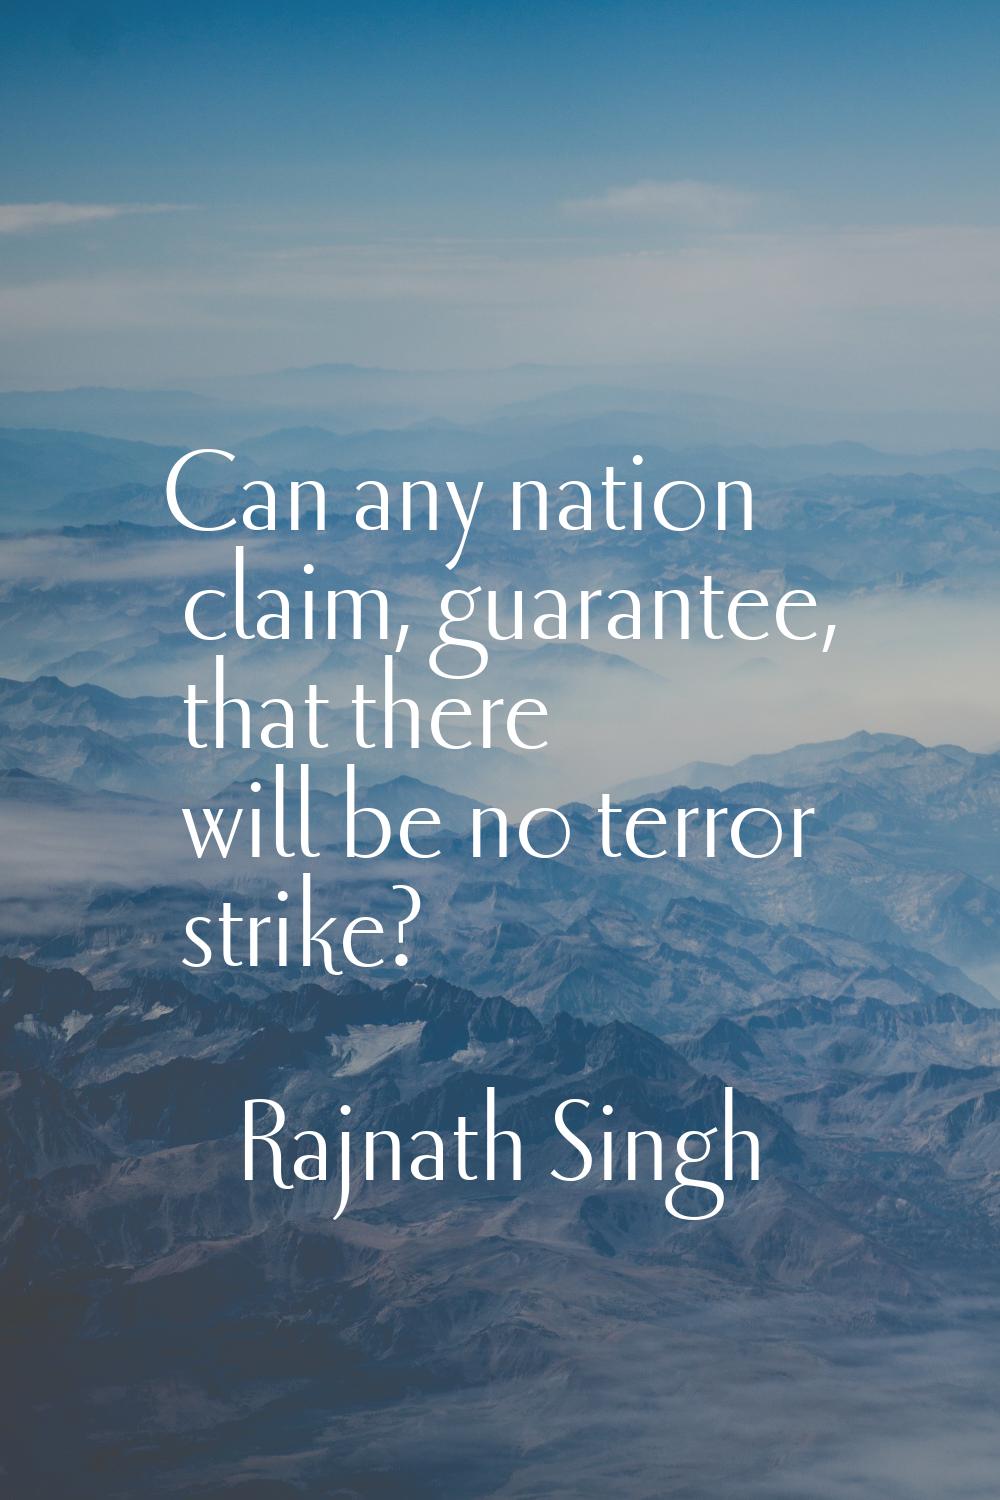 Can any nation claim, guarantee, that there will be no terror strike?